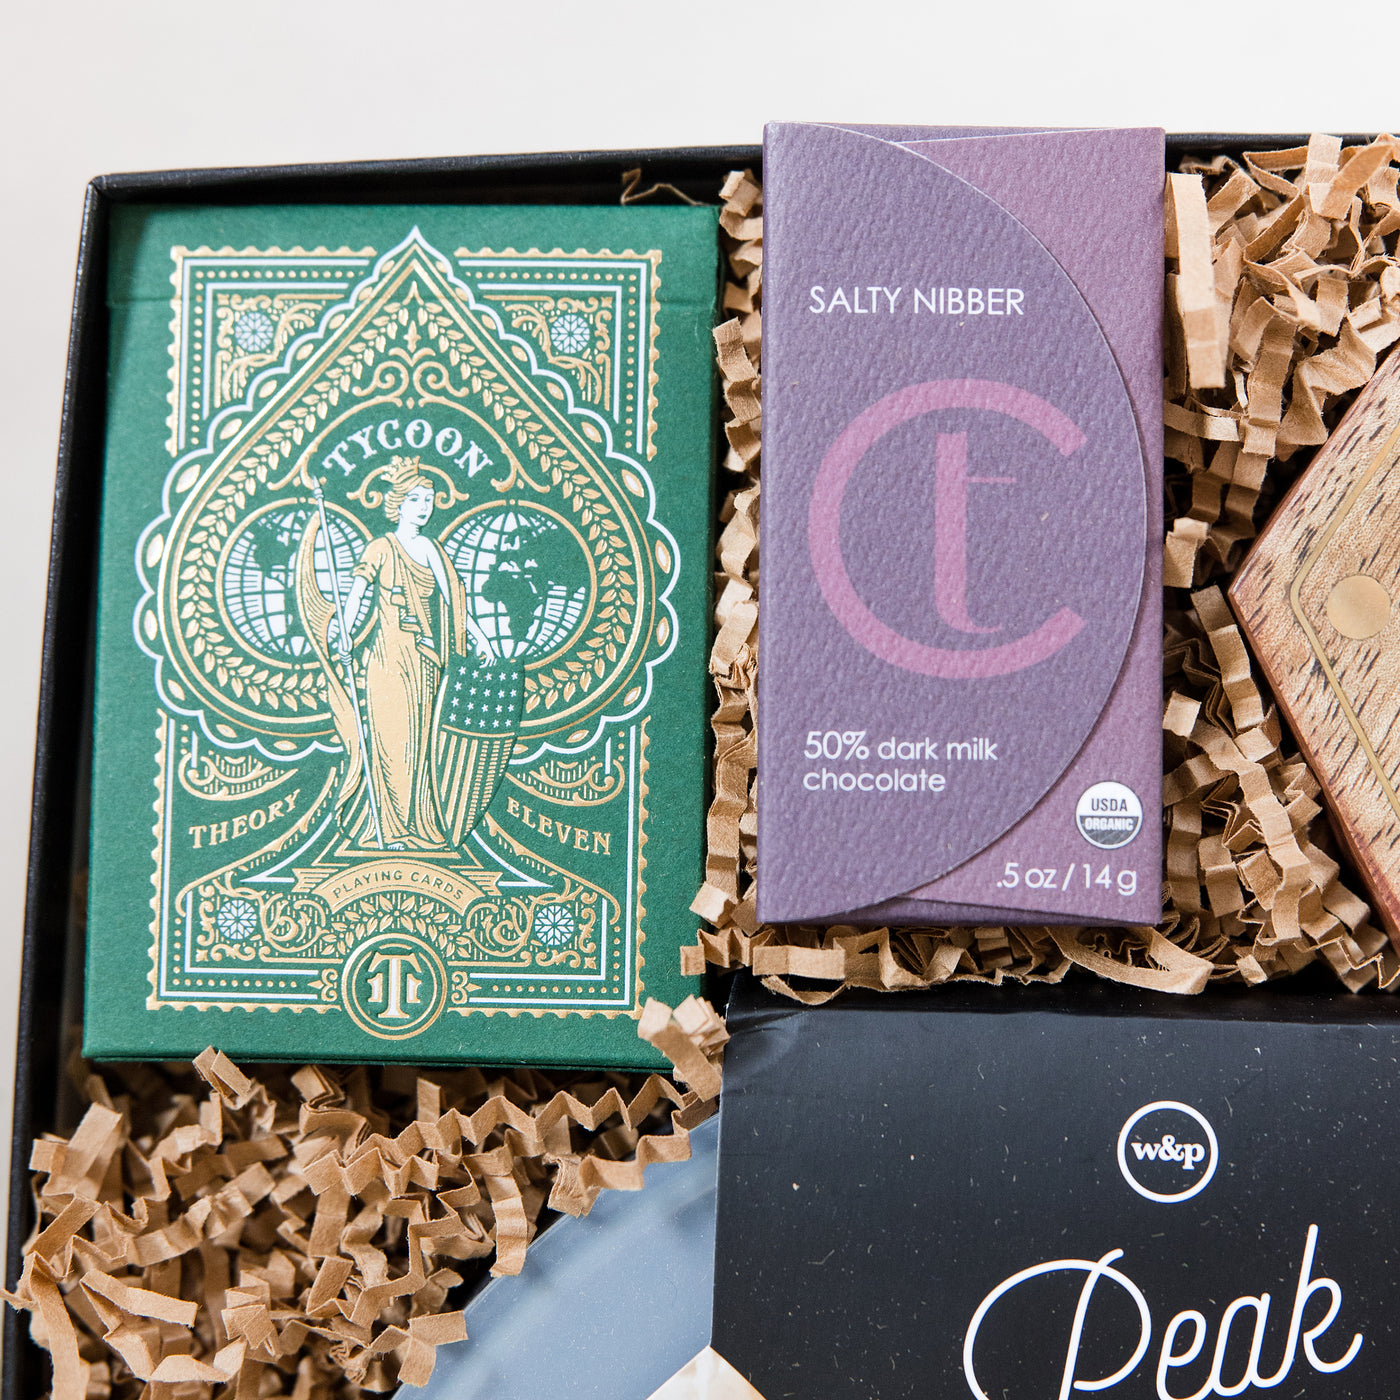 A clever and playful gift to help foster connection at home. This gift box includes all the makings of an amazing game night! Close up of Deck of Playing Cards and Chocolate Dark Salty Nibber